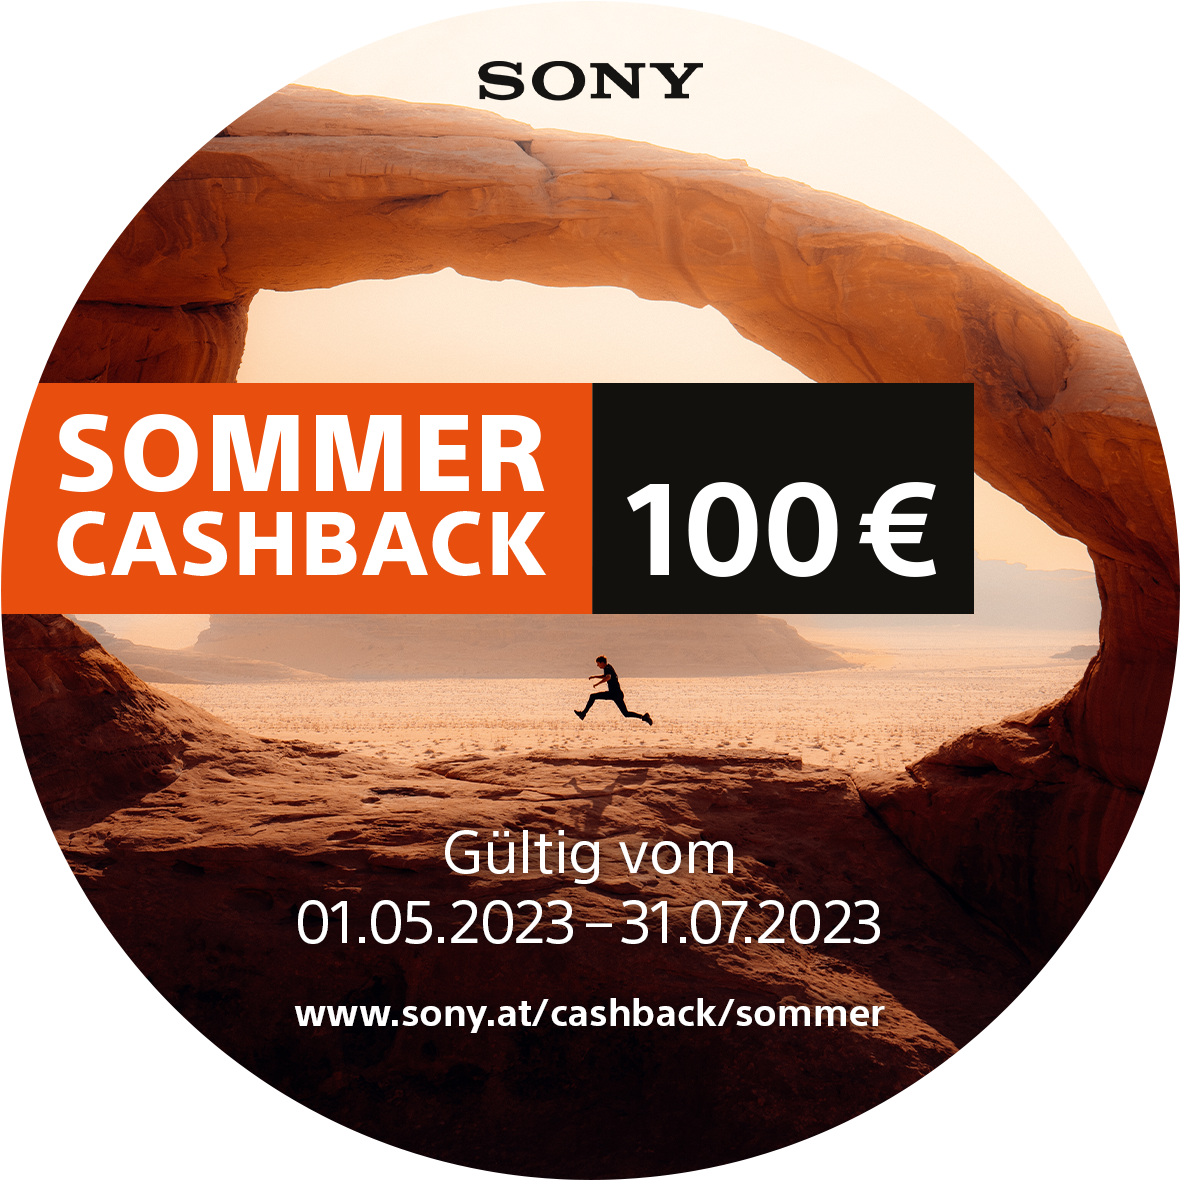 350 6 CHAT DI Sommer Cashback Online Button r4 ATDE 100